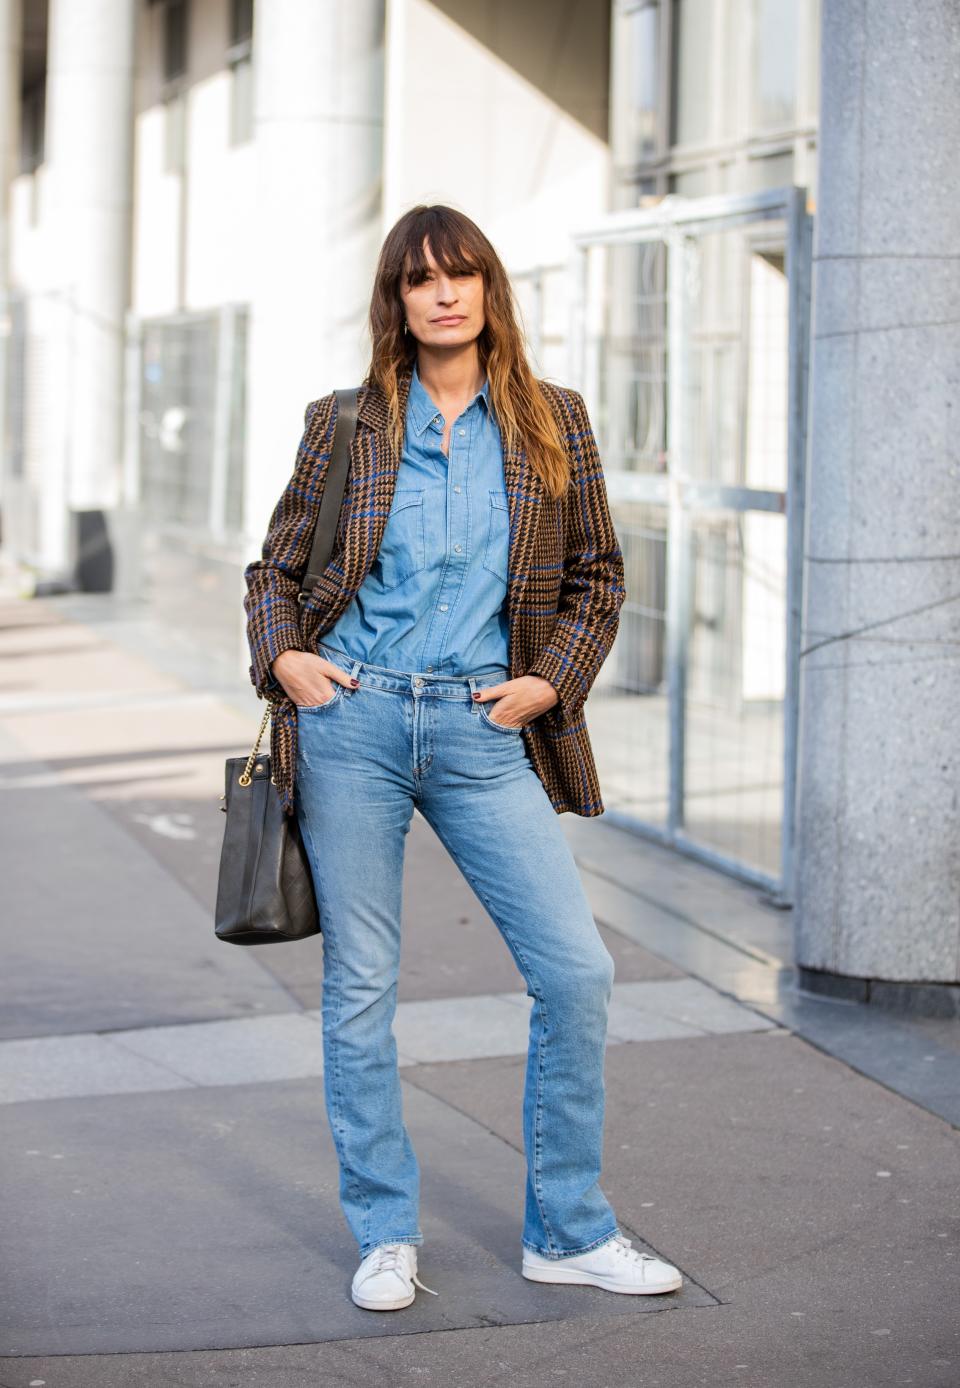 Denim-on-Denim Outfits Are Truly Easy to Pull Off